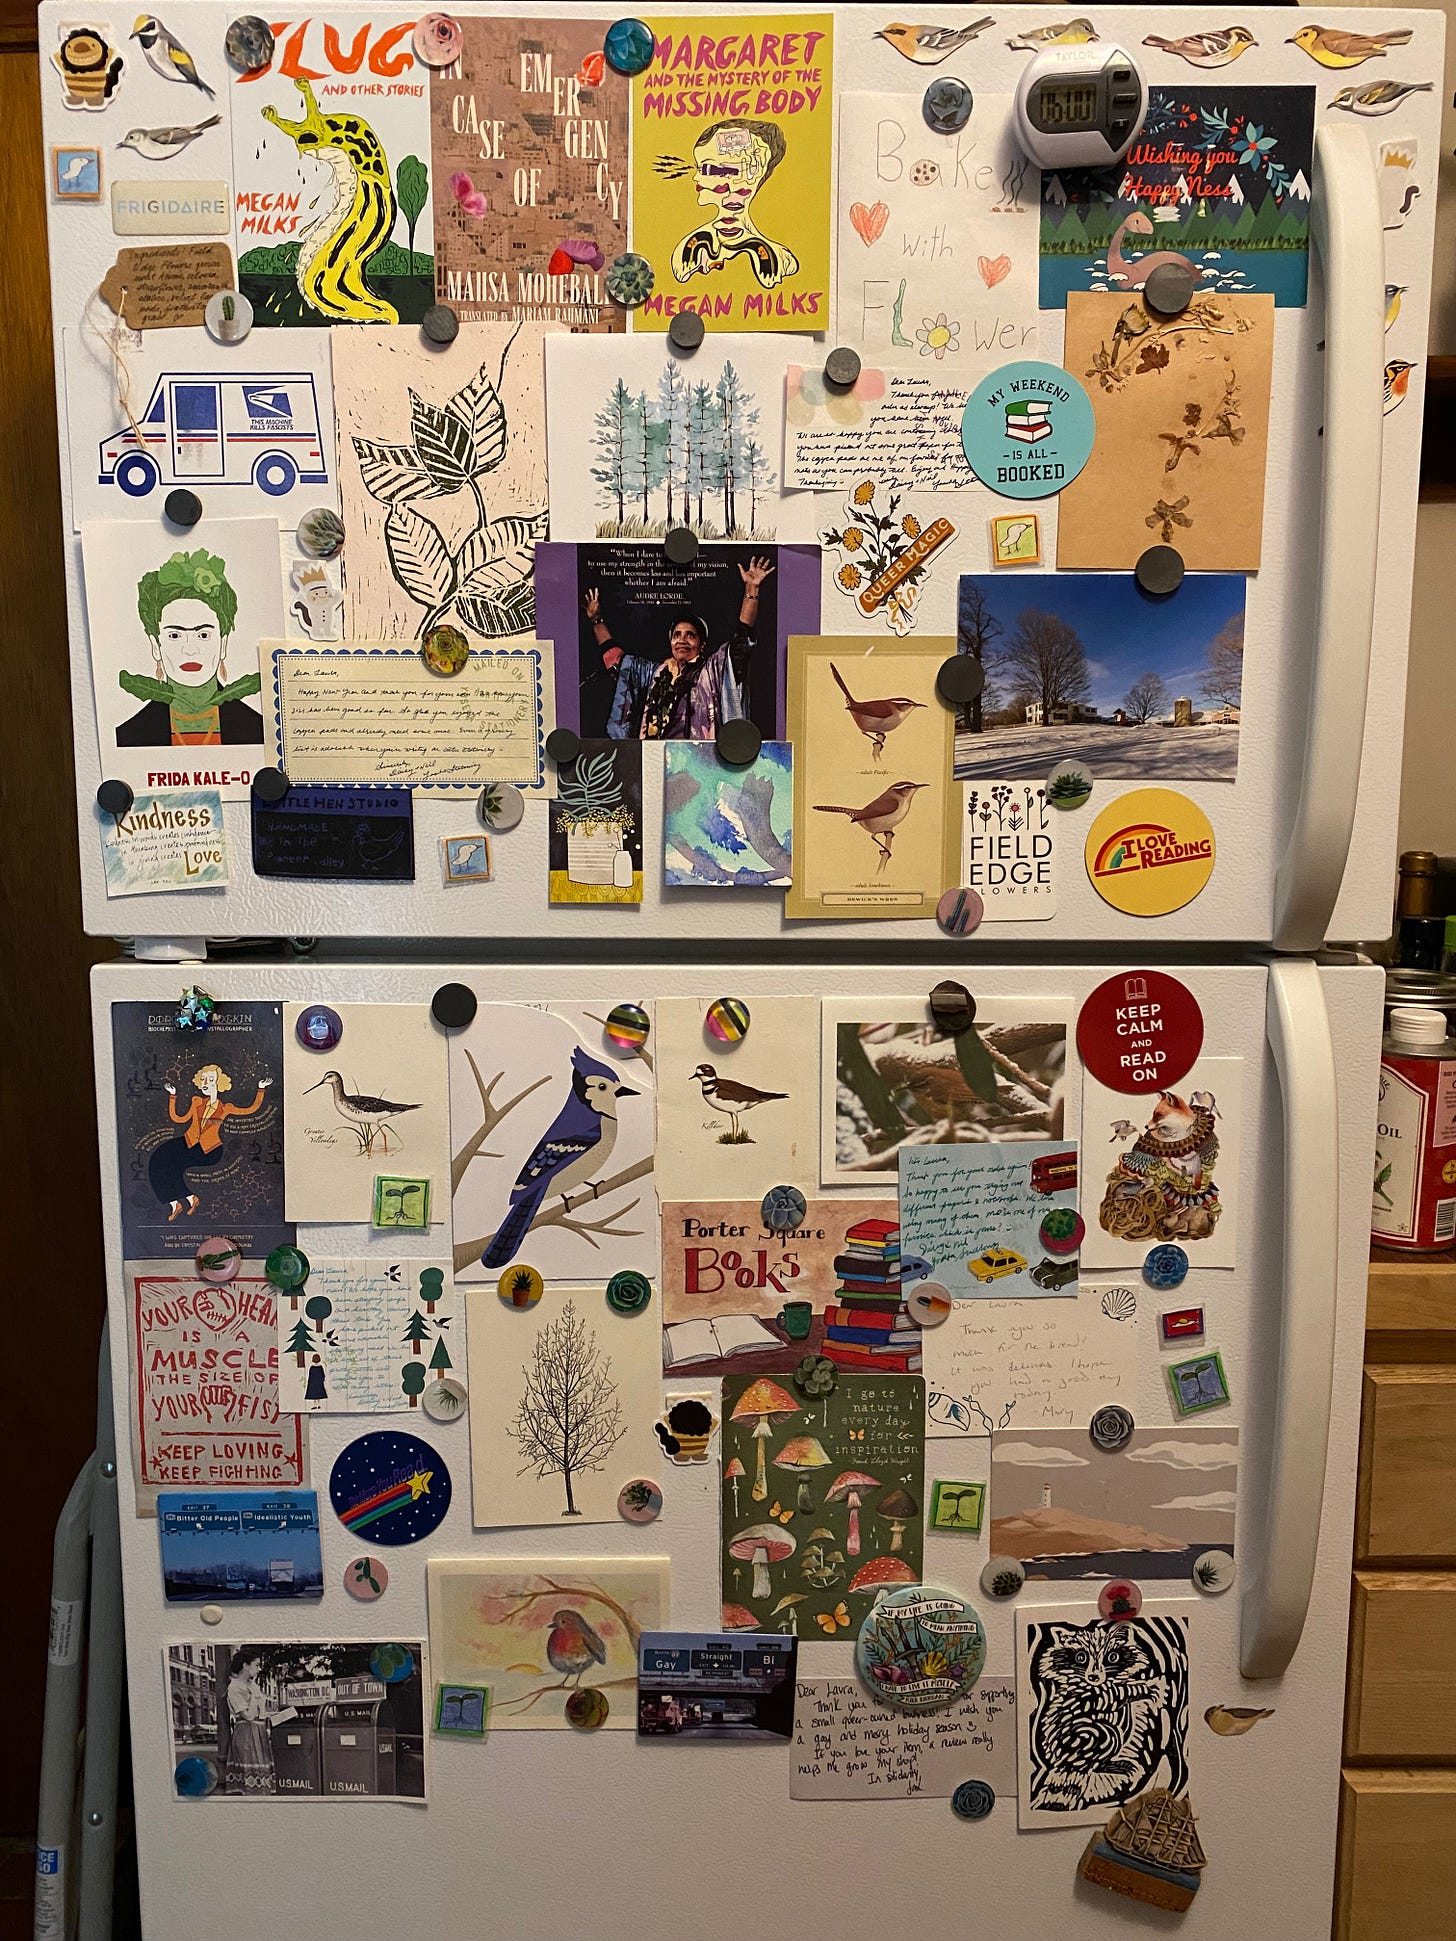 Closeup of a white fridge completely covered in colorful cards, postcards, kids’ drawings, and magnets. There are many notecards with bird illustrations, a few book-themed magnets, a postcard with a quote from Audre Lorde, and many handwritten notes.